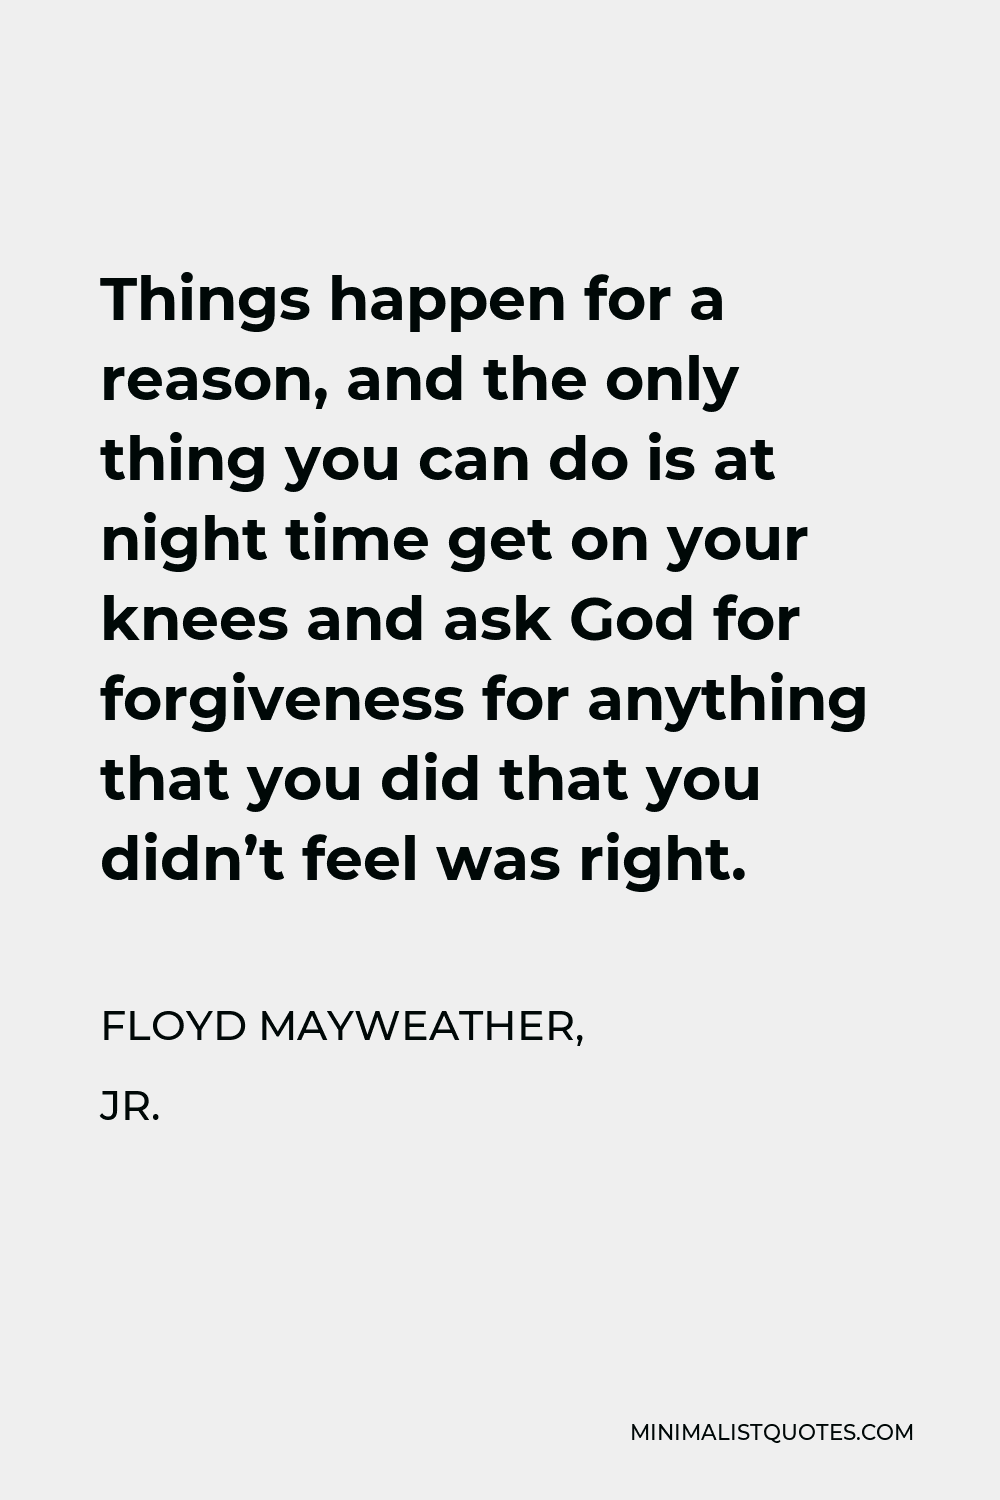 Floyd Mayweather, Jr. Quote - Things happen for a reason, and the only thing you can do is at night time get on your knees and ask God for forgiveness for anything that you did that you didn’t feel was right.